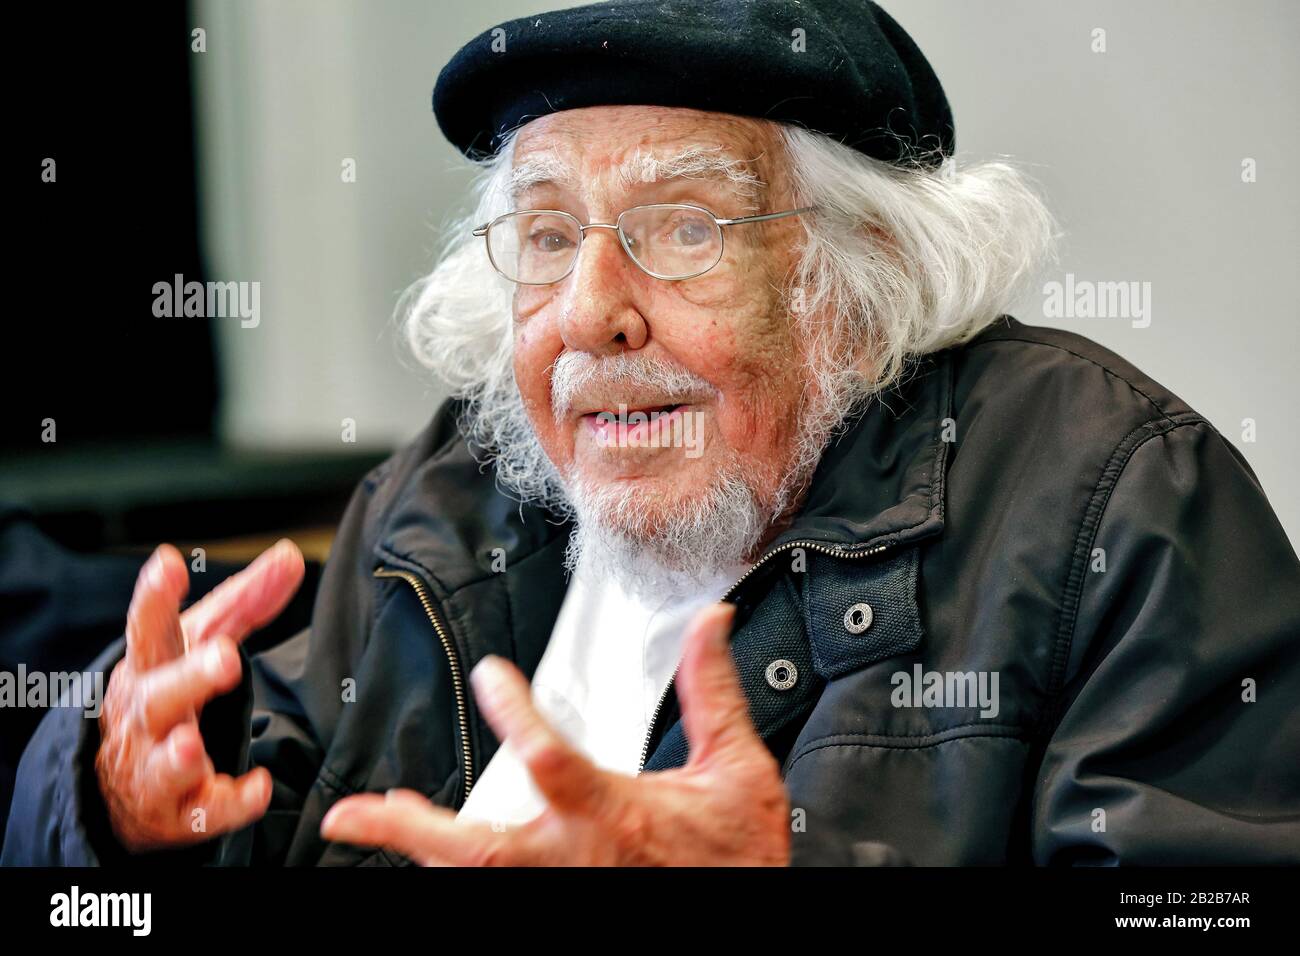 Managua, Nicaragua. 1st Mar, 2020. 25.06.2014, the Nicaraguan, Catholic priest, socialist politician and poet Ernesto Cardenal Martínez as the award winner at the awarding of Theodor Wanner Prize in the Allianz Forum in Berlin. Ernesto Cardenal died on March 1st, 2020 in Managua, Nicaragua. | usage worldwide Credit: dpa/Alamy Live News Stock Photo